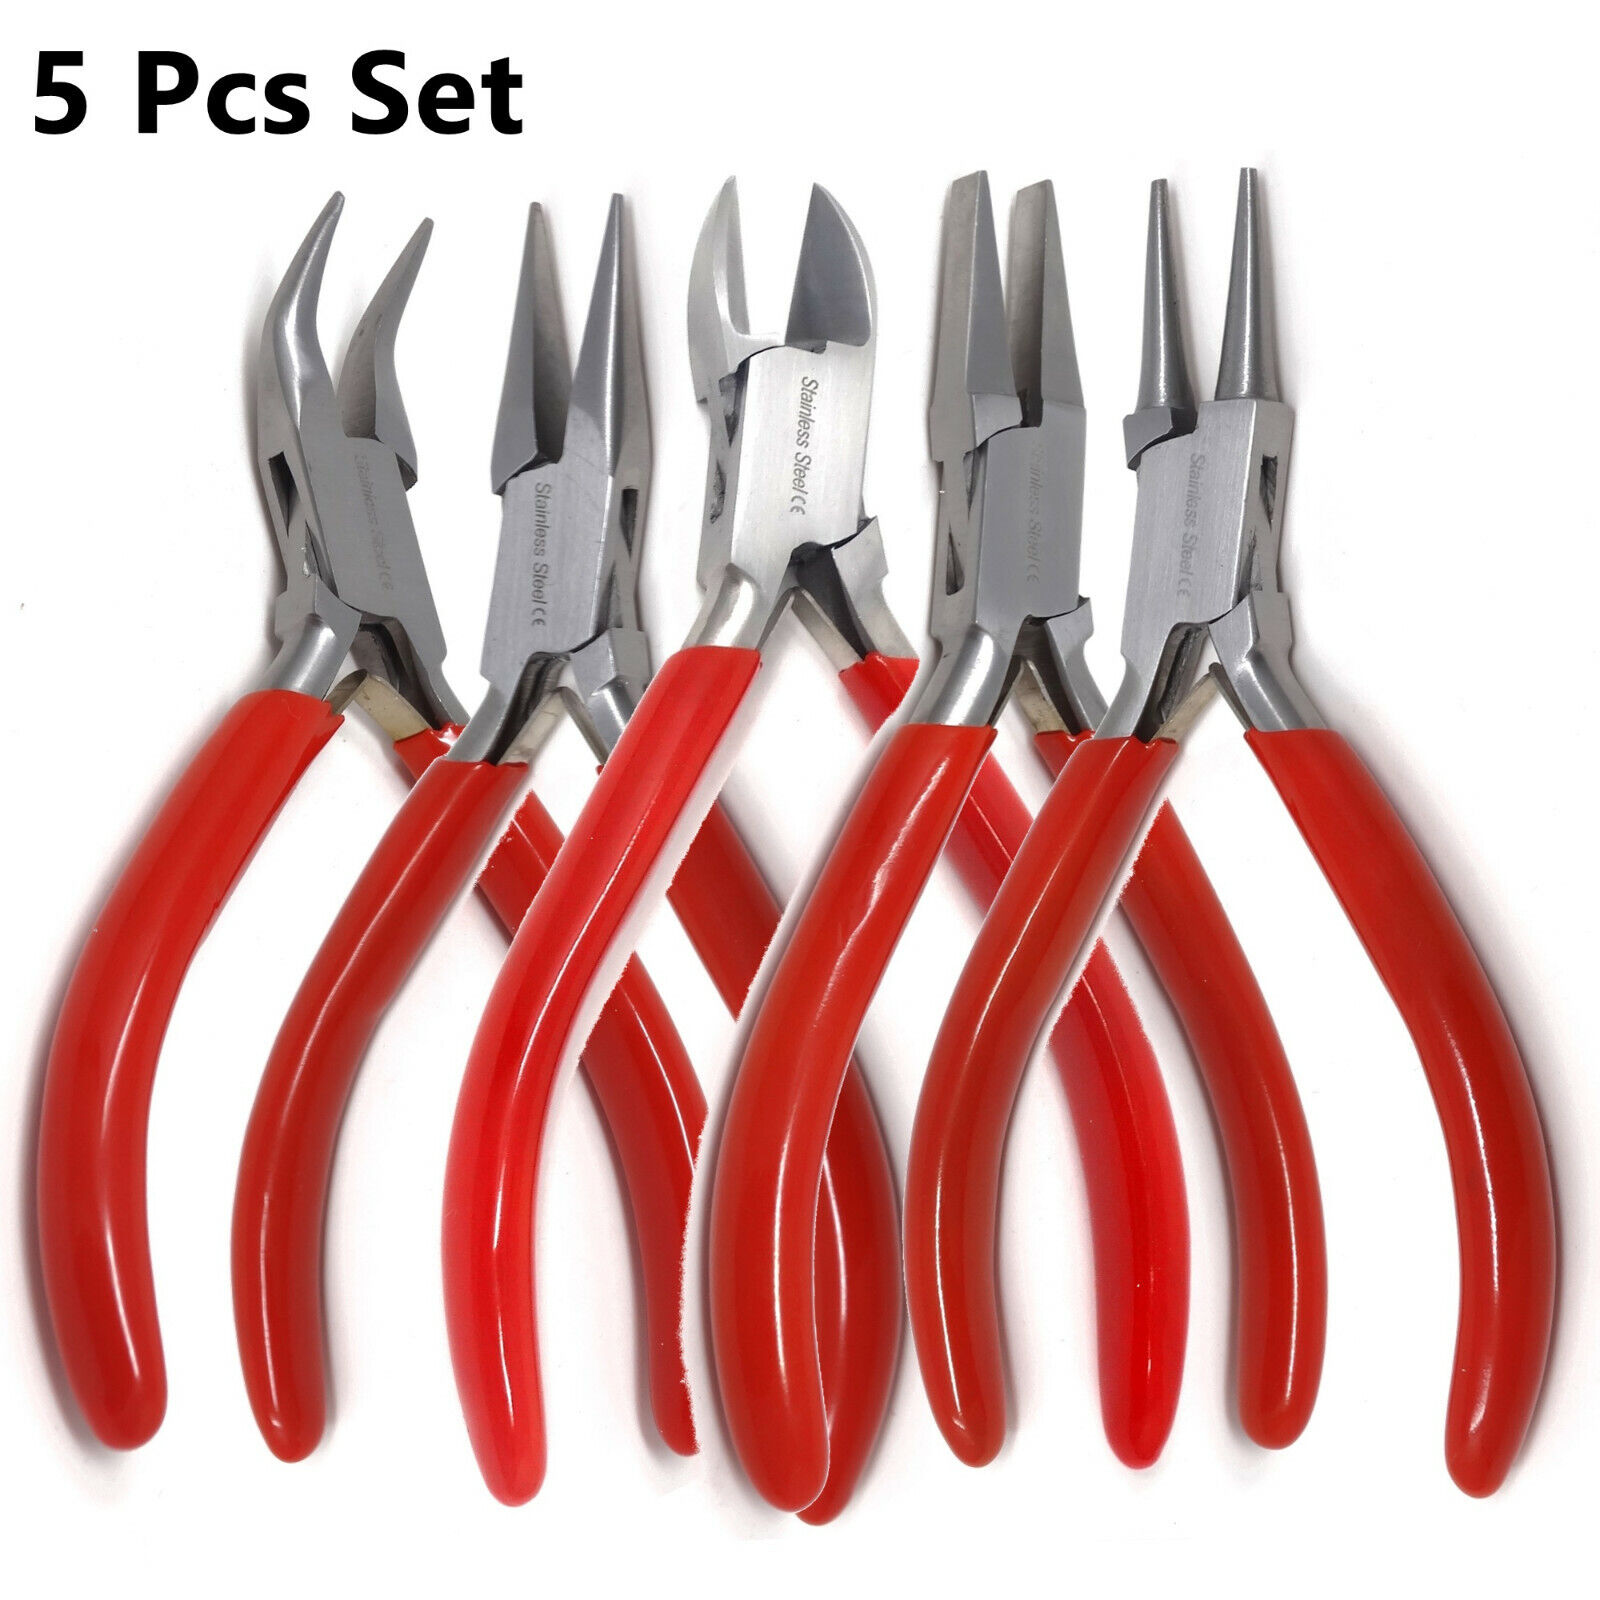 5pcs JEWELERS PLIERS SET JEWELRY MAKING BEADING WIRE WRAPPING HOBBY 5" PLIER US A2Z SCILAB Does Not Apply